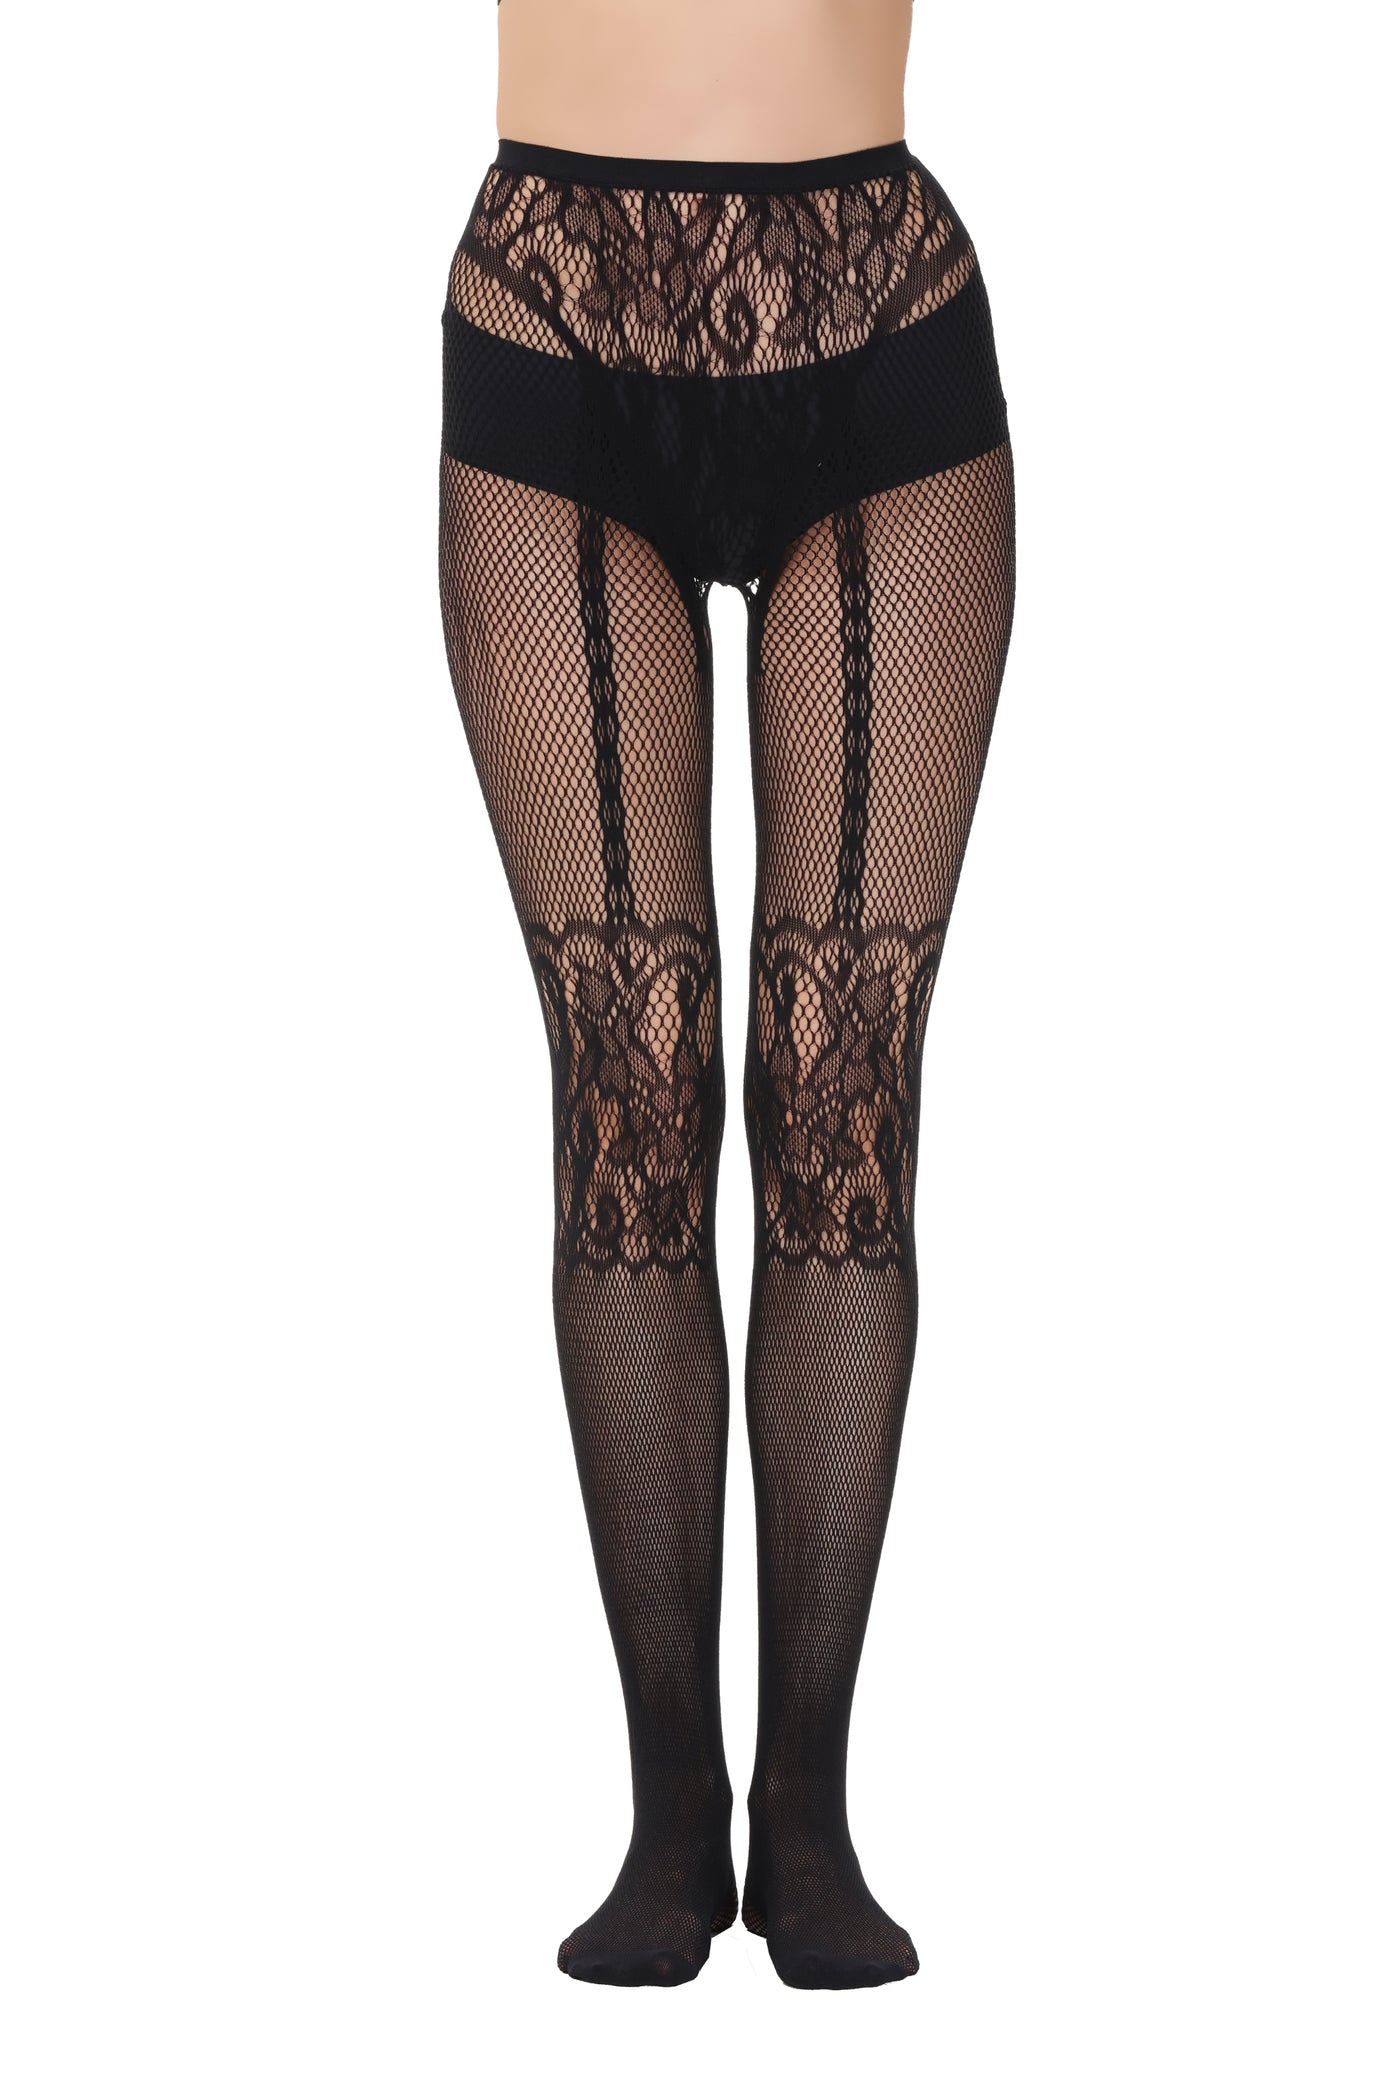 Fishnet Tights 110955 Front